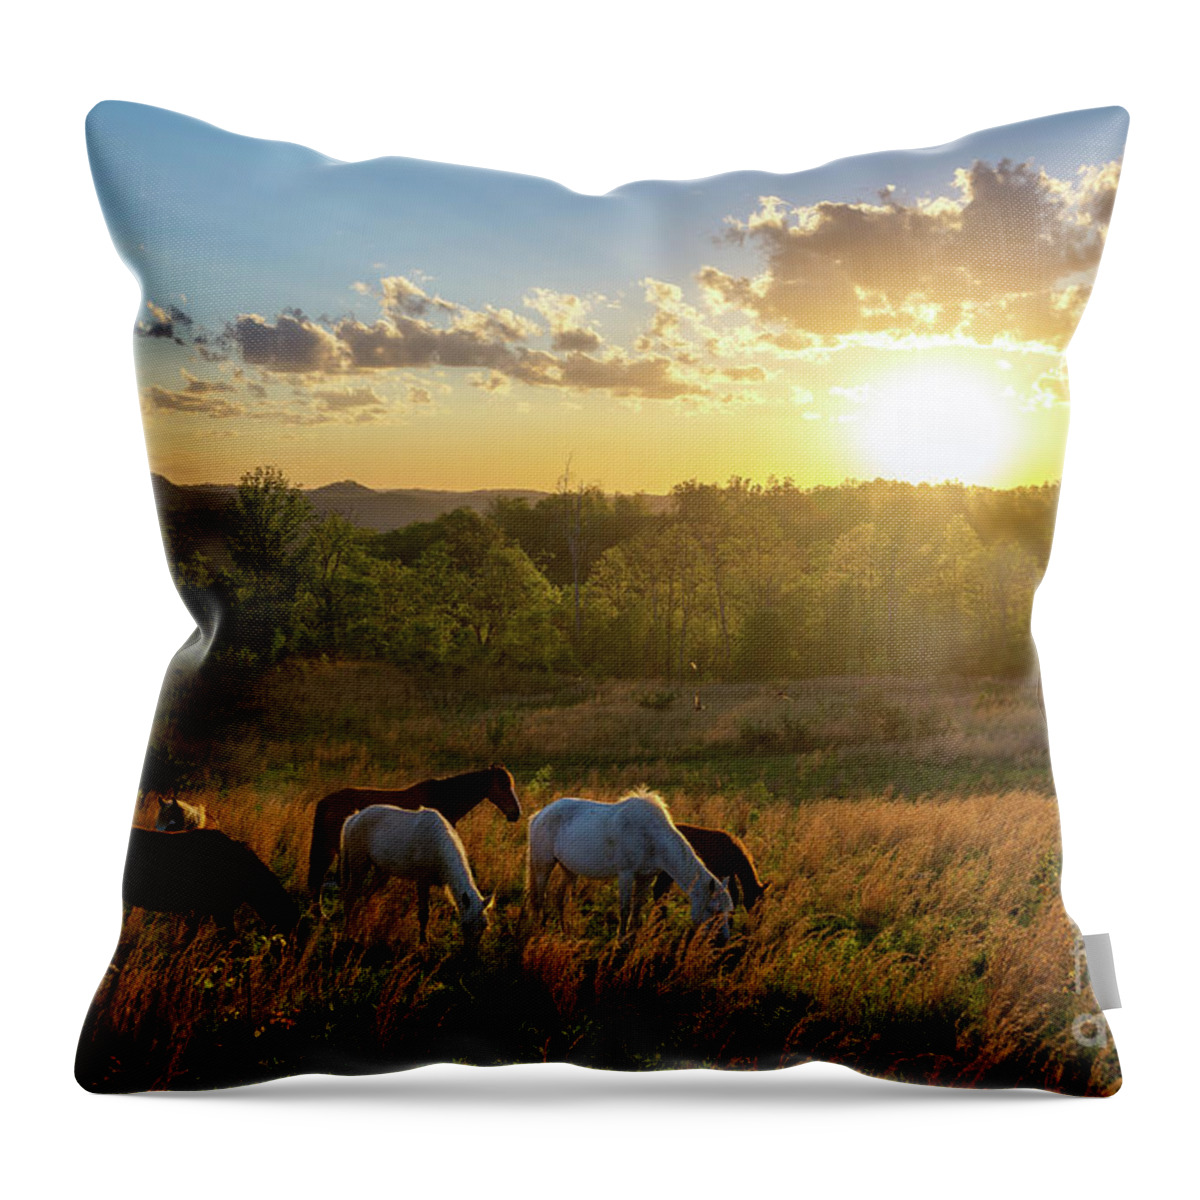 Sky Throw Pillow featuring the photograph Open Spaces by Anthony Heflin